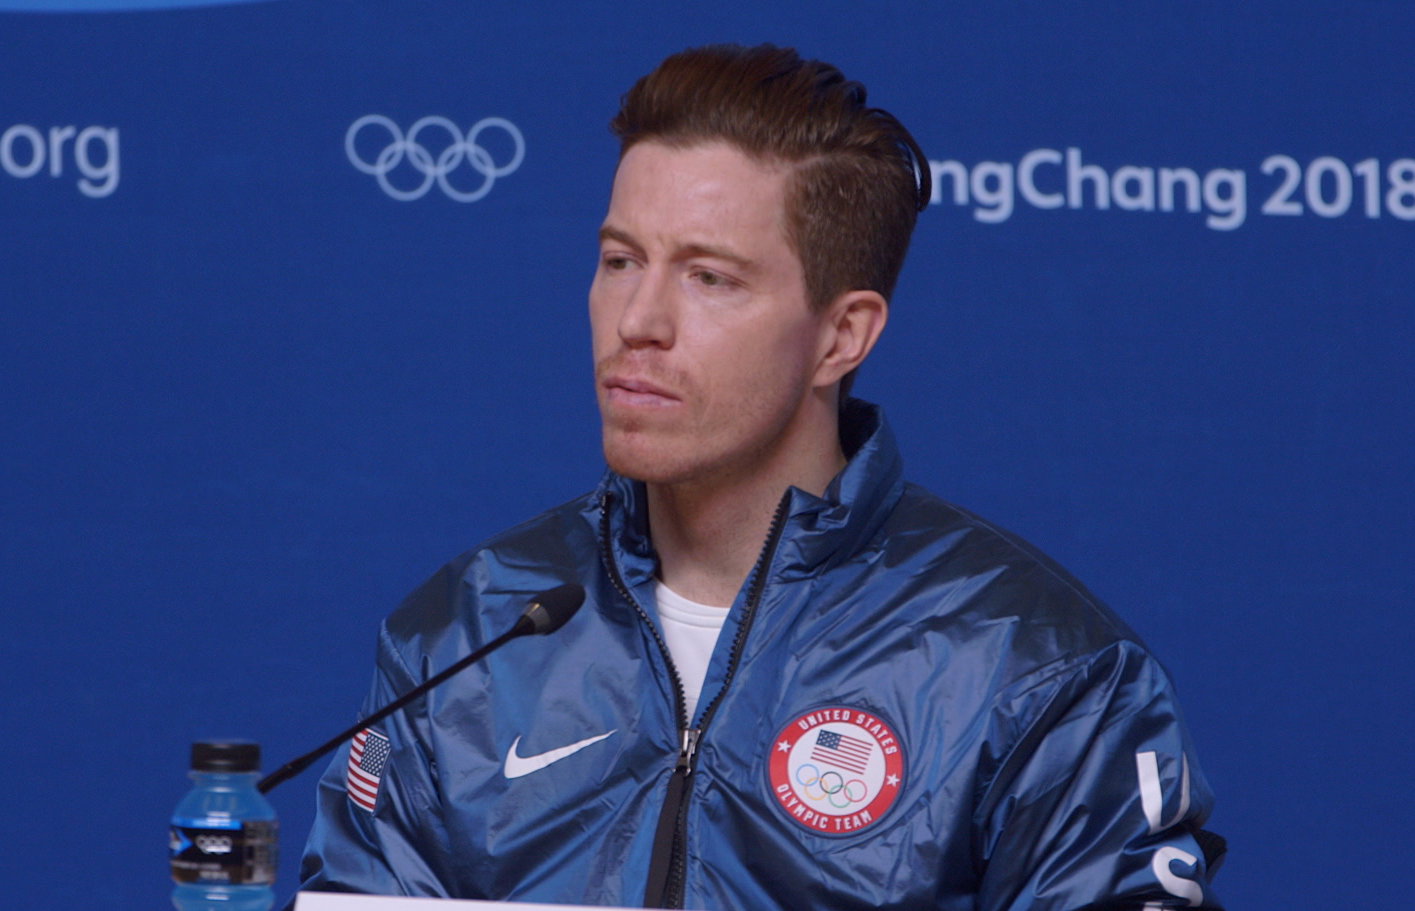 Fans Demand To “Bring Back the Long Hair” As Shaun White Shares